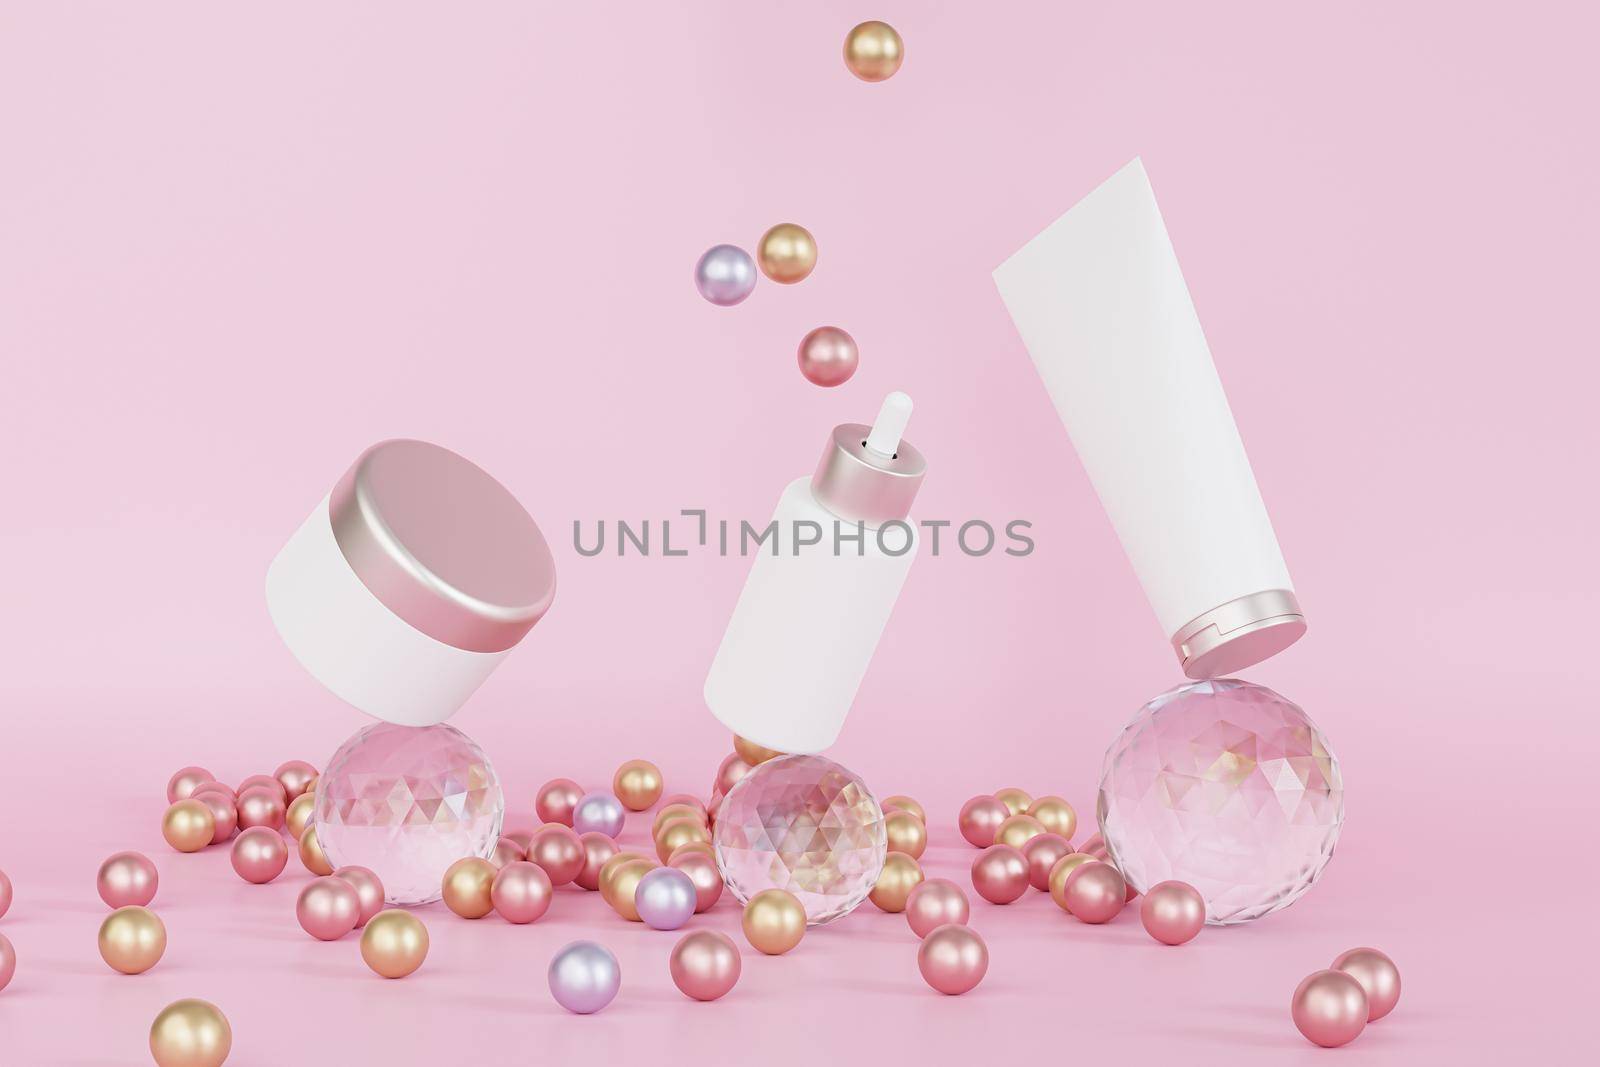 Mockup dropper bottle, lotion tube and cream jar for cosmetics products or advertising balancing on glass spheres, 3d illustration render by Frostroomhead